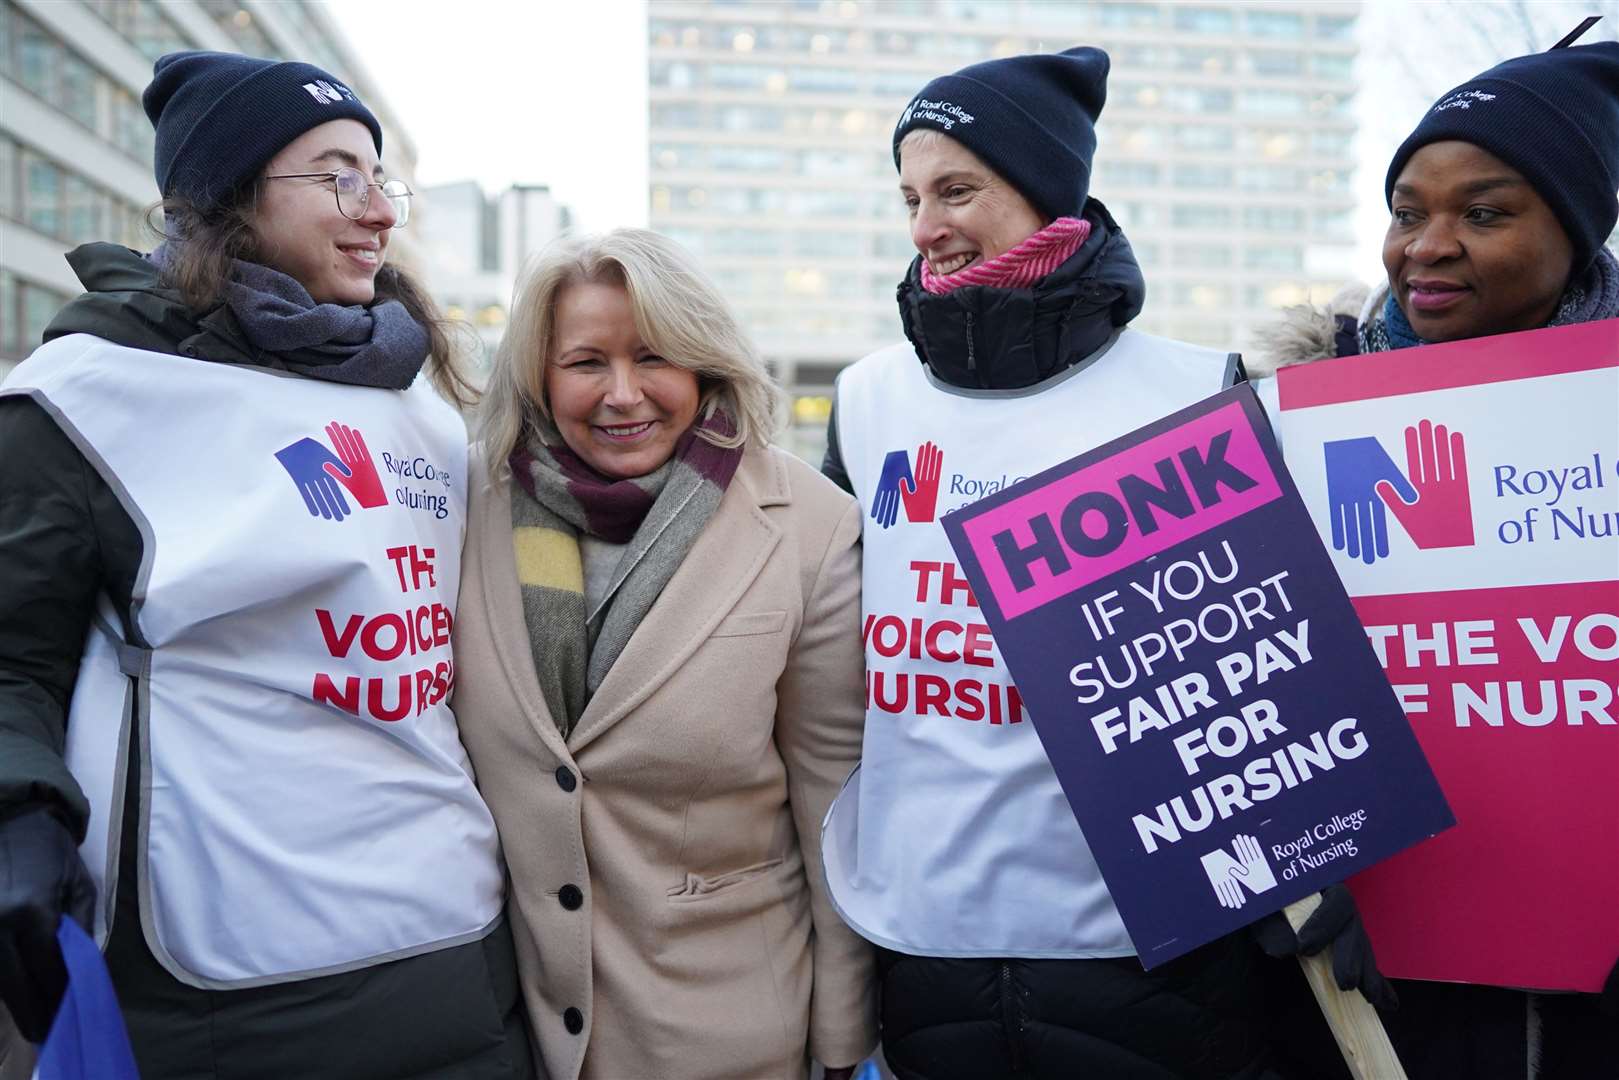 RCN General Secretary Pat Cullen, second left, with members of the Royal College of Nursing on the picket line outside St Thomas’ Hospital in London (Stefan Rousseau/PA)